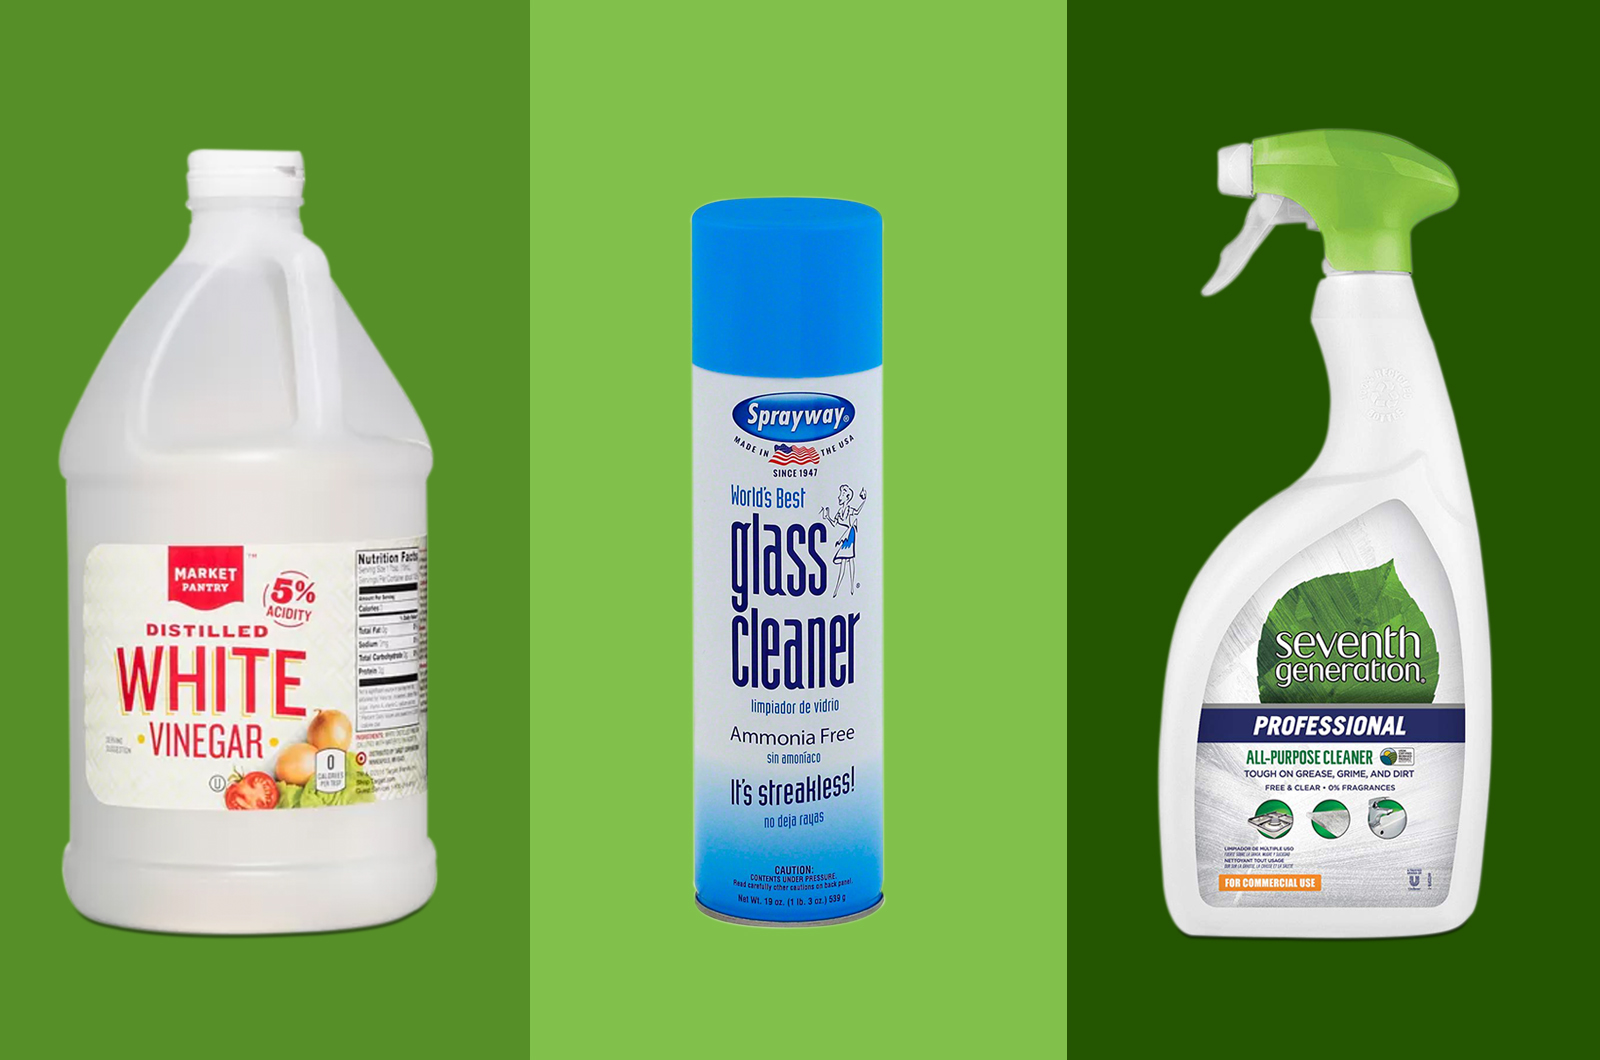 products for cleaning